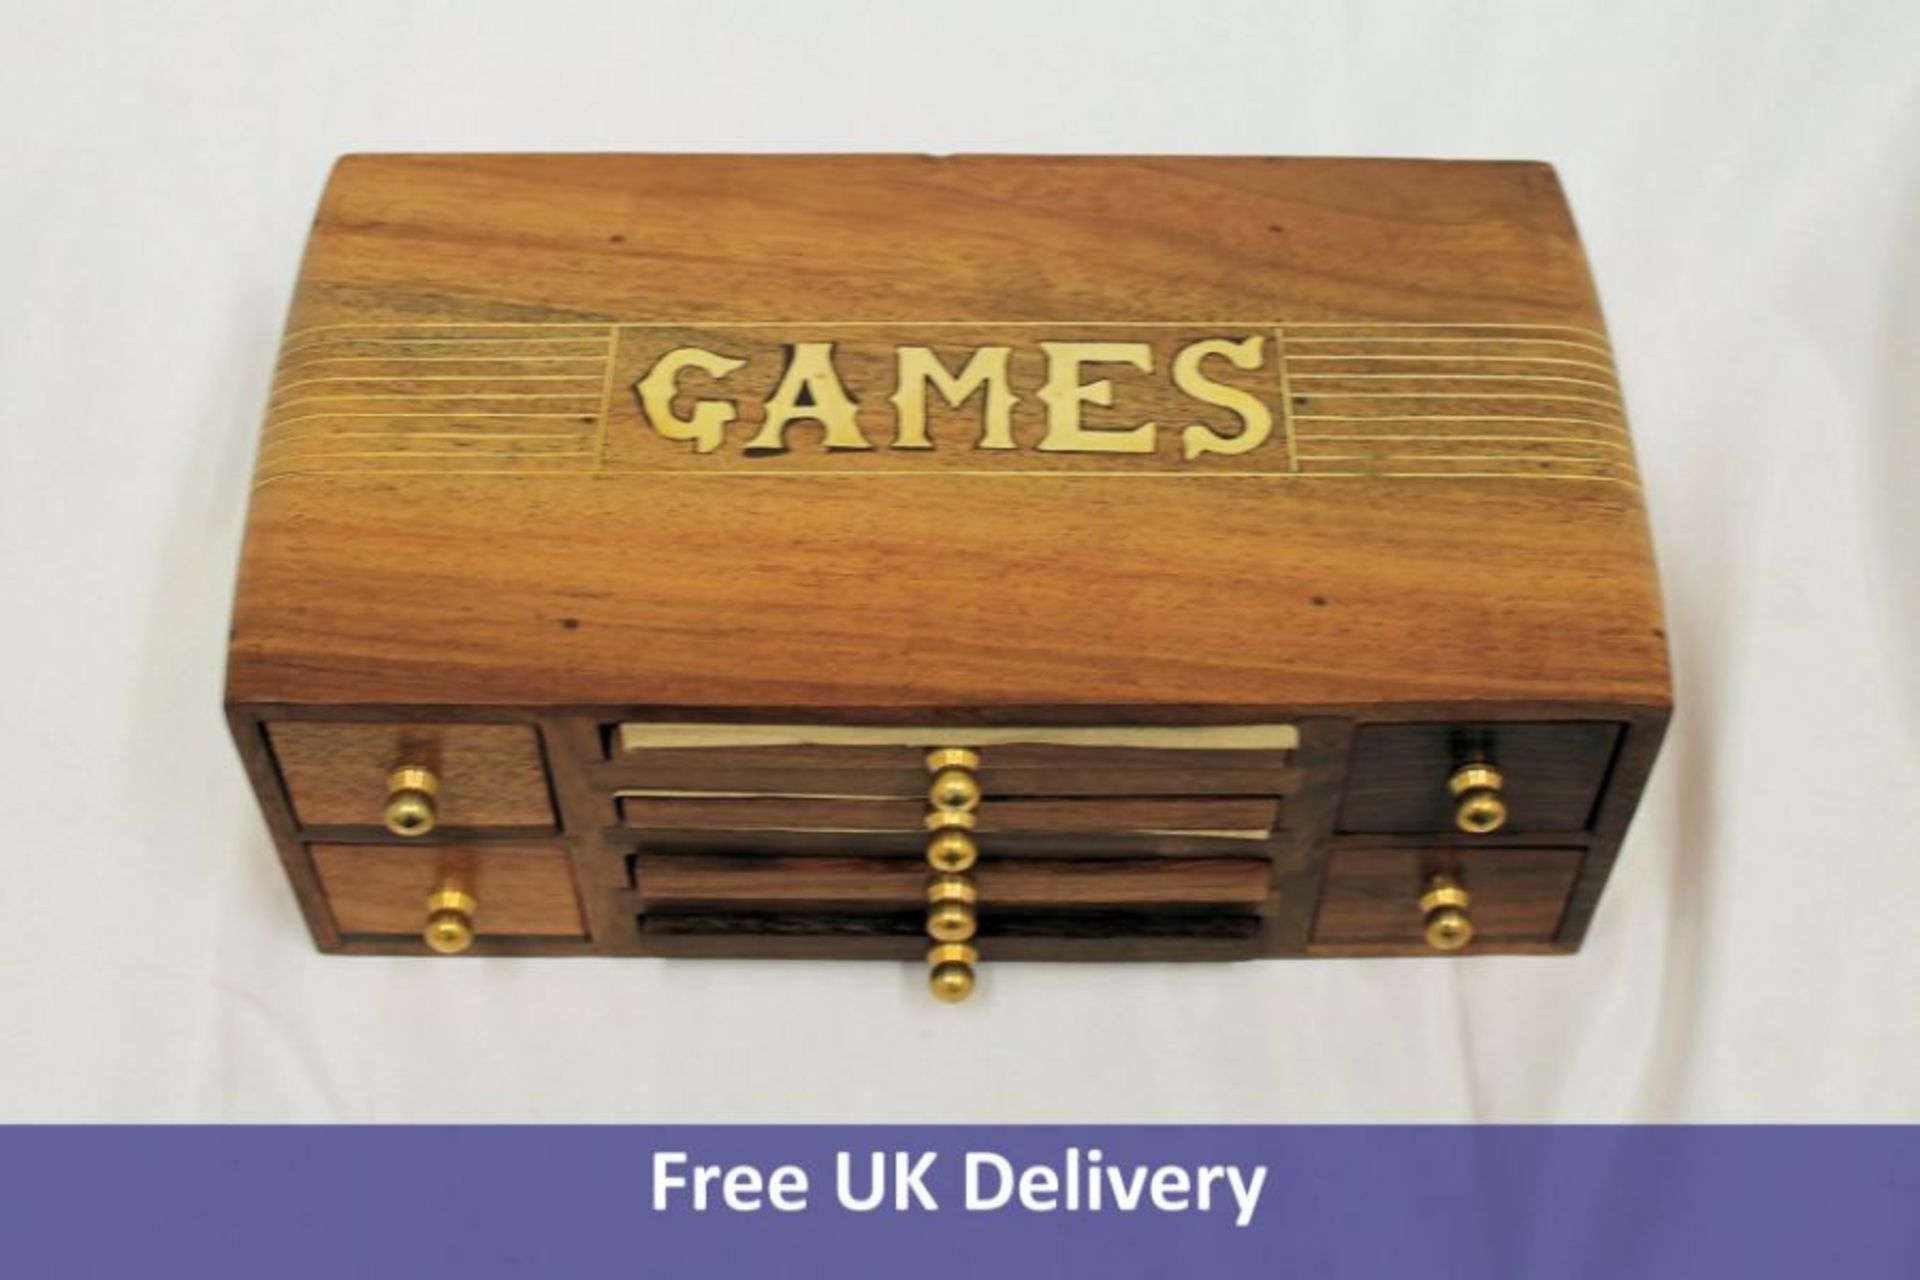 4 in 1 Multi Games Wooden Crafted Box, Tic Tac, Chess, Marbles, Dominos, Steel Balls Platter